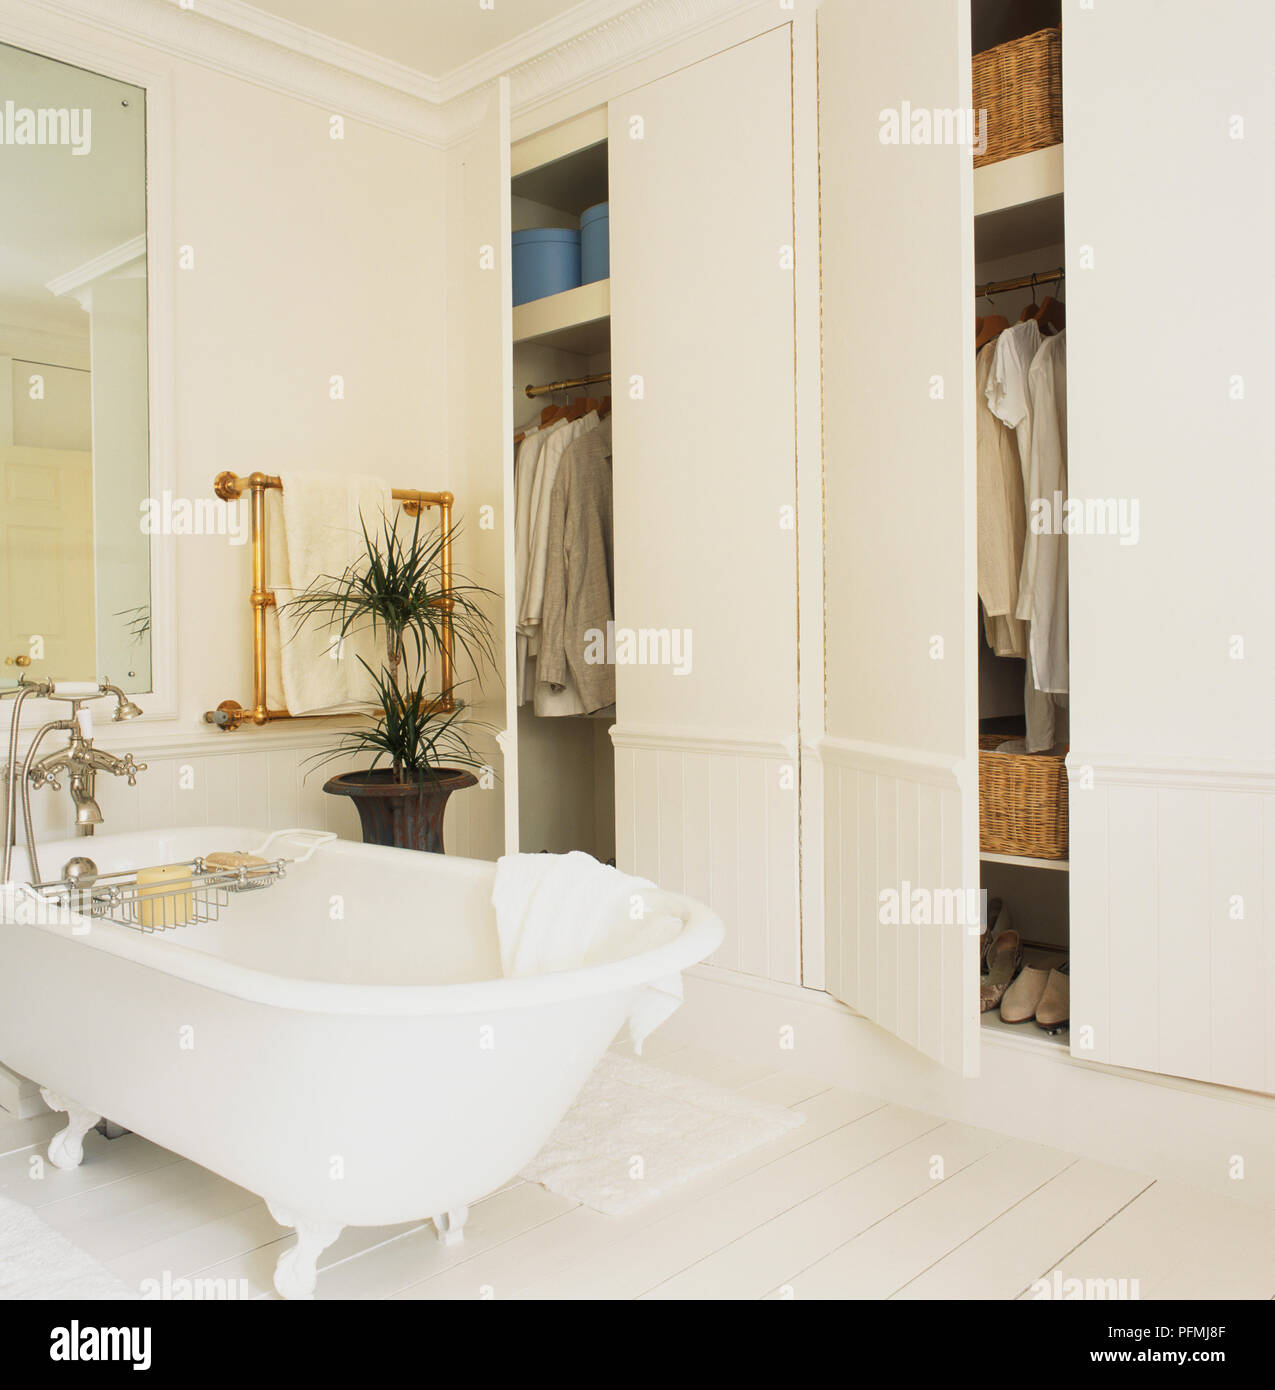 Stand-alone bath next to fitted wardrobes. Stock Photo